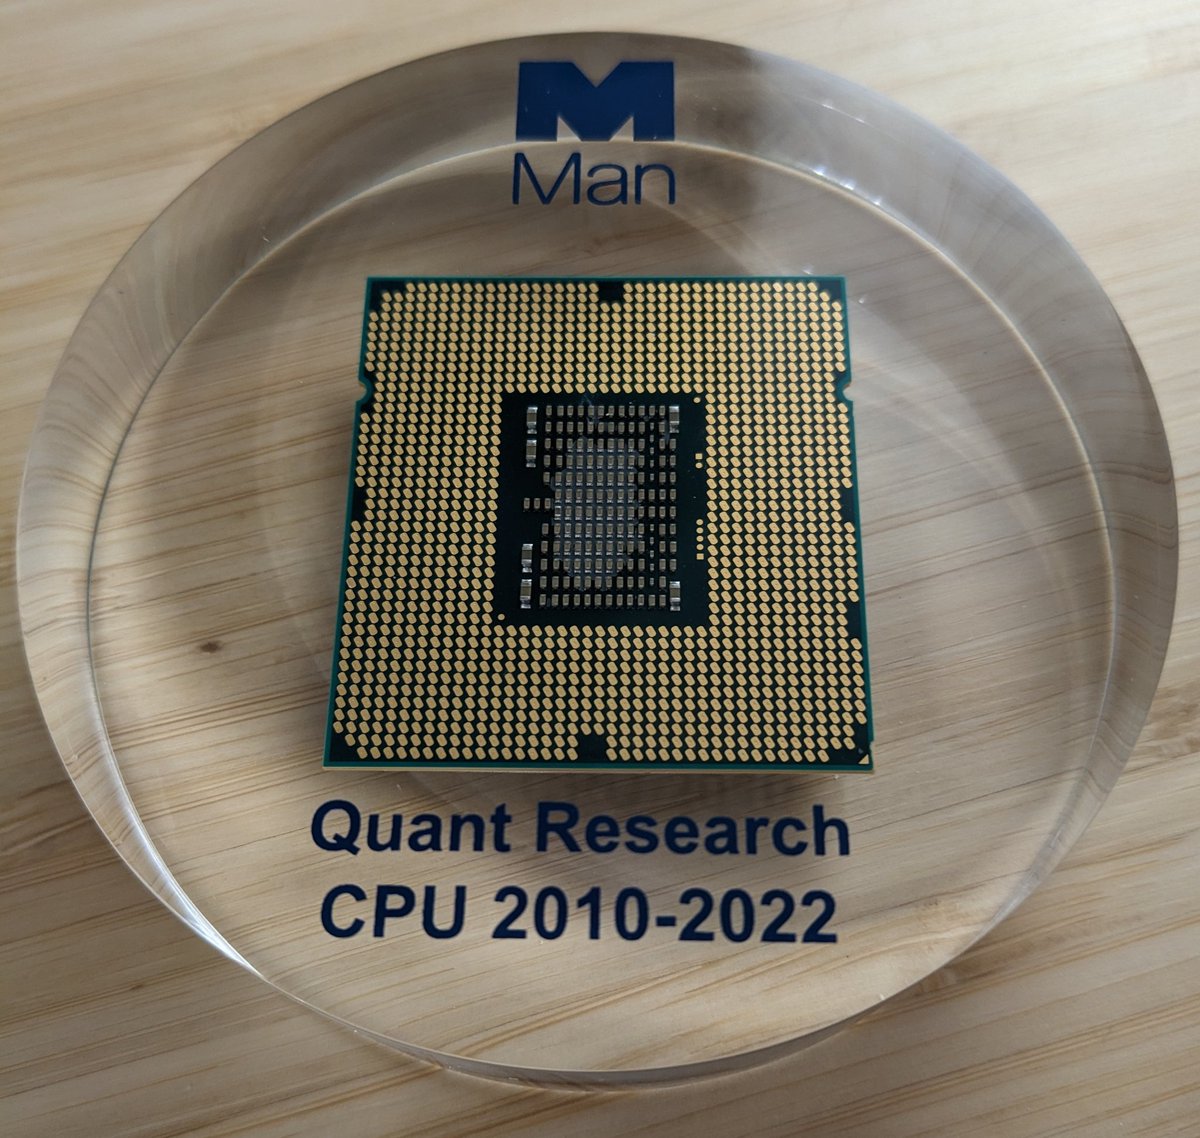 Intel Xeon from the Man Group quant research cluster